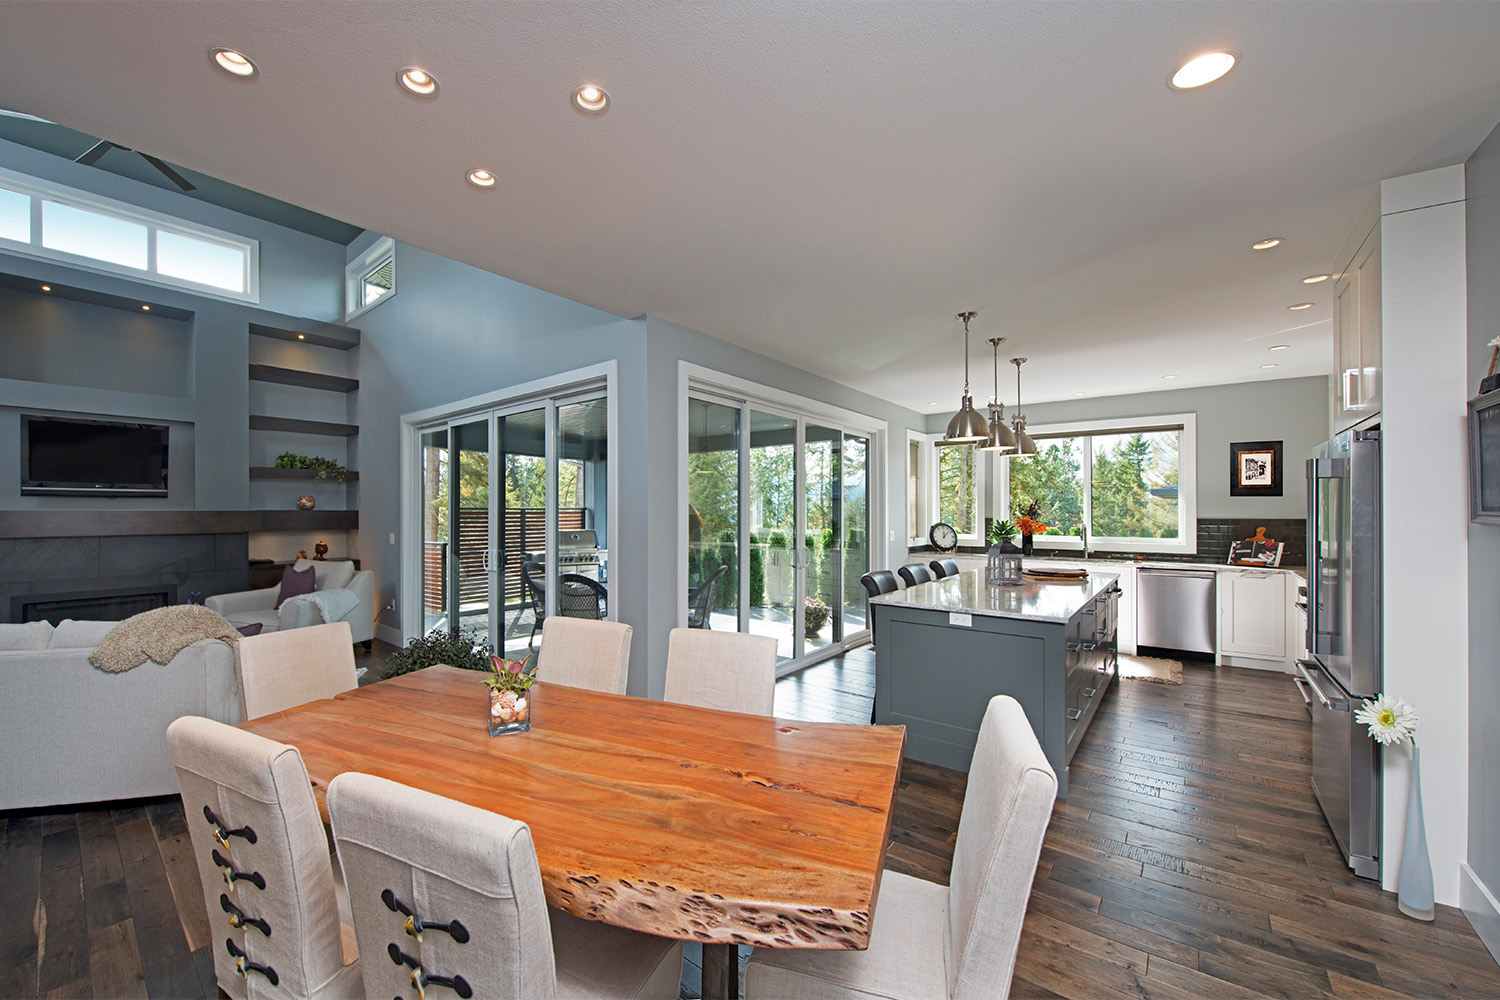 kitchen with granite countertop island, rustic dining room, natural light from sliding glass doors